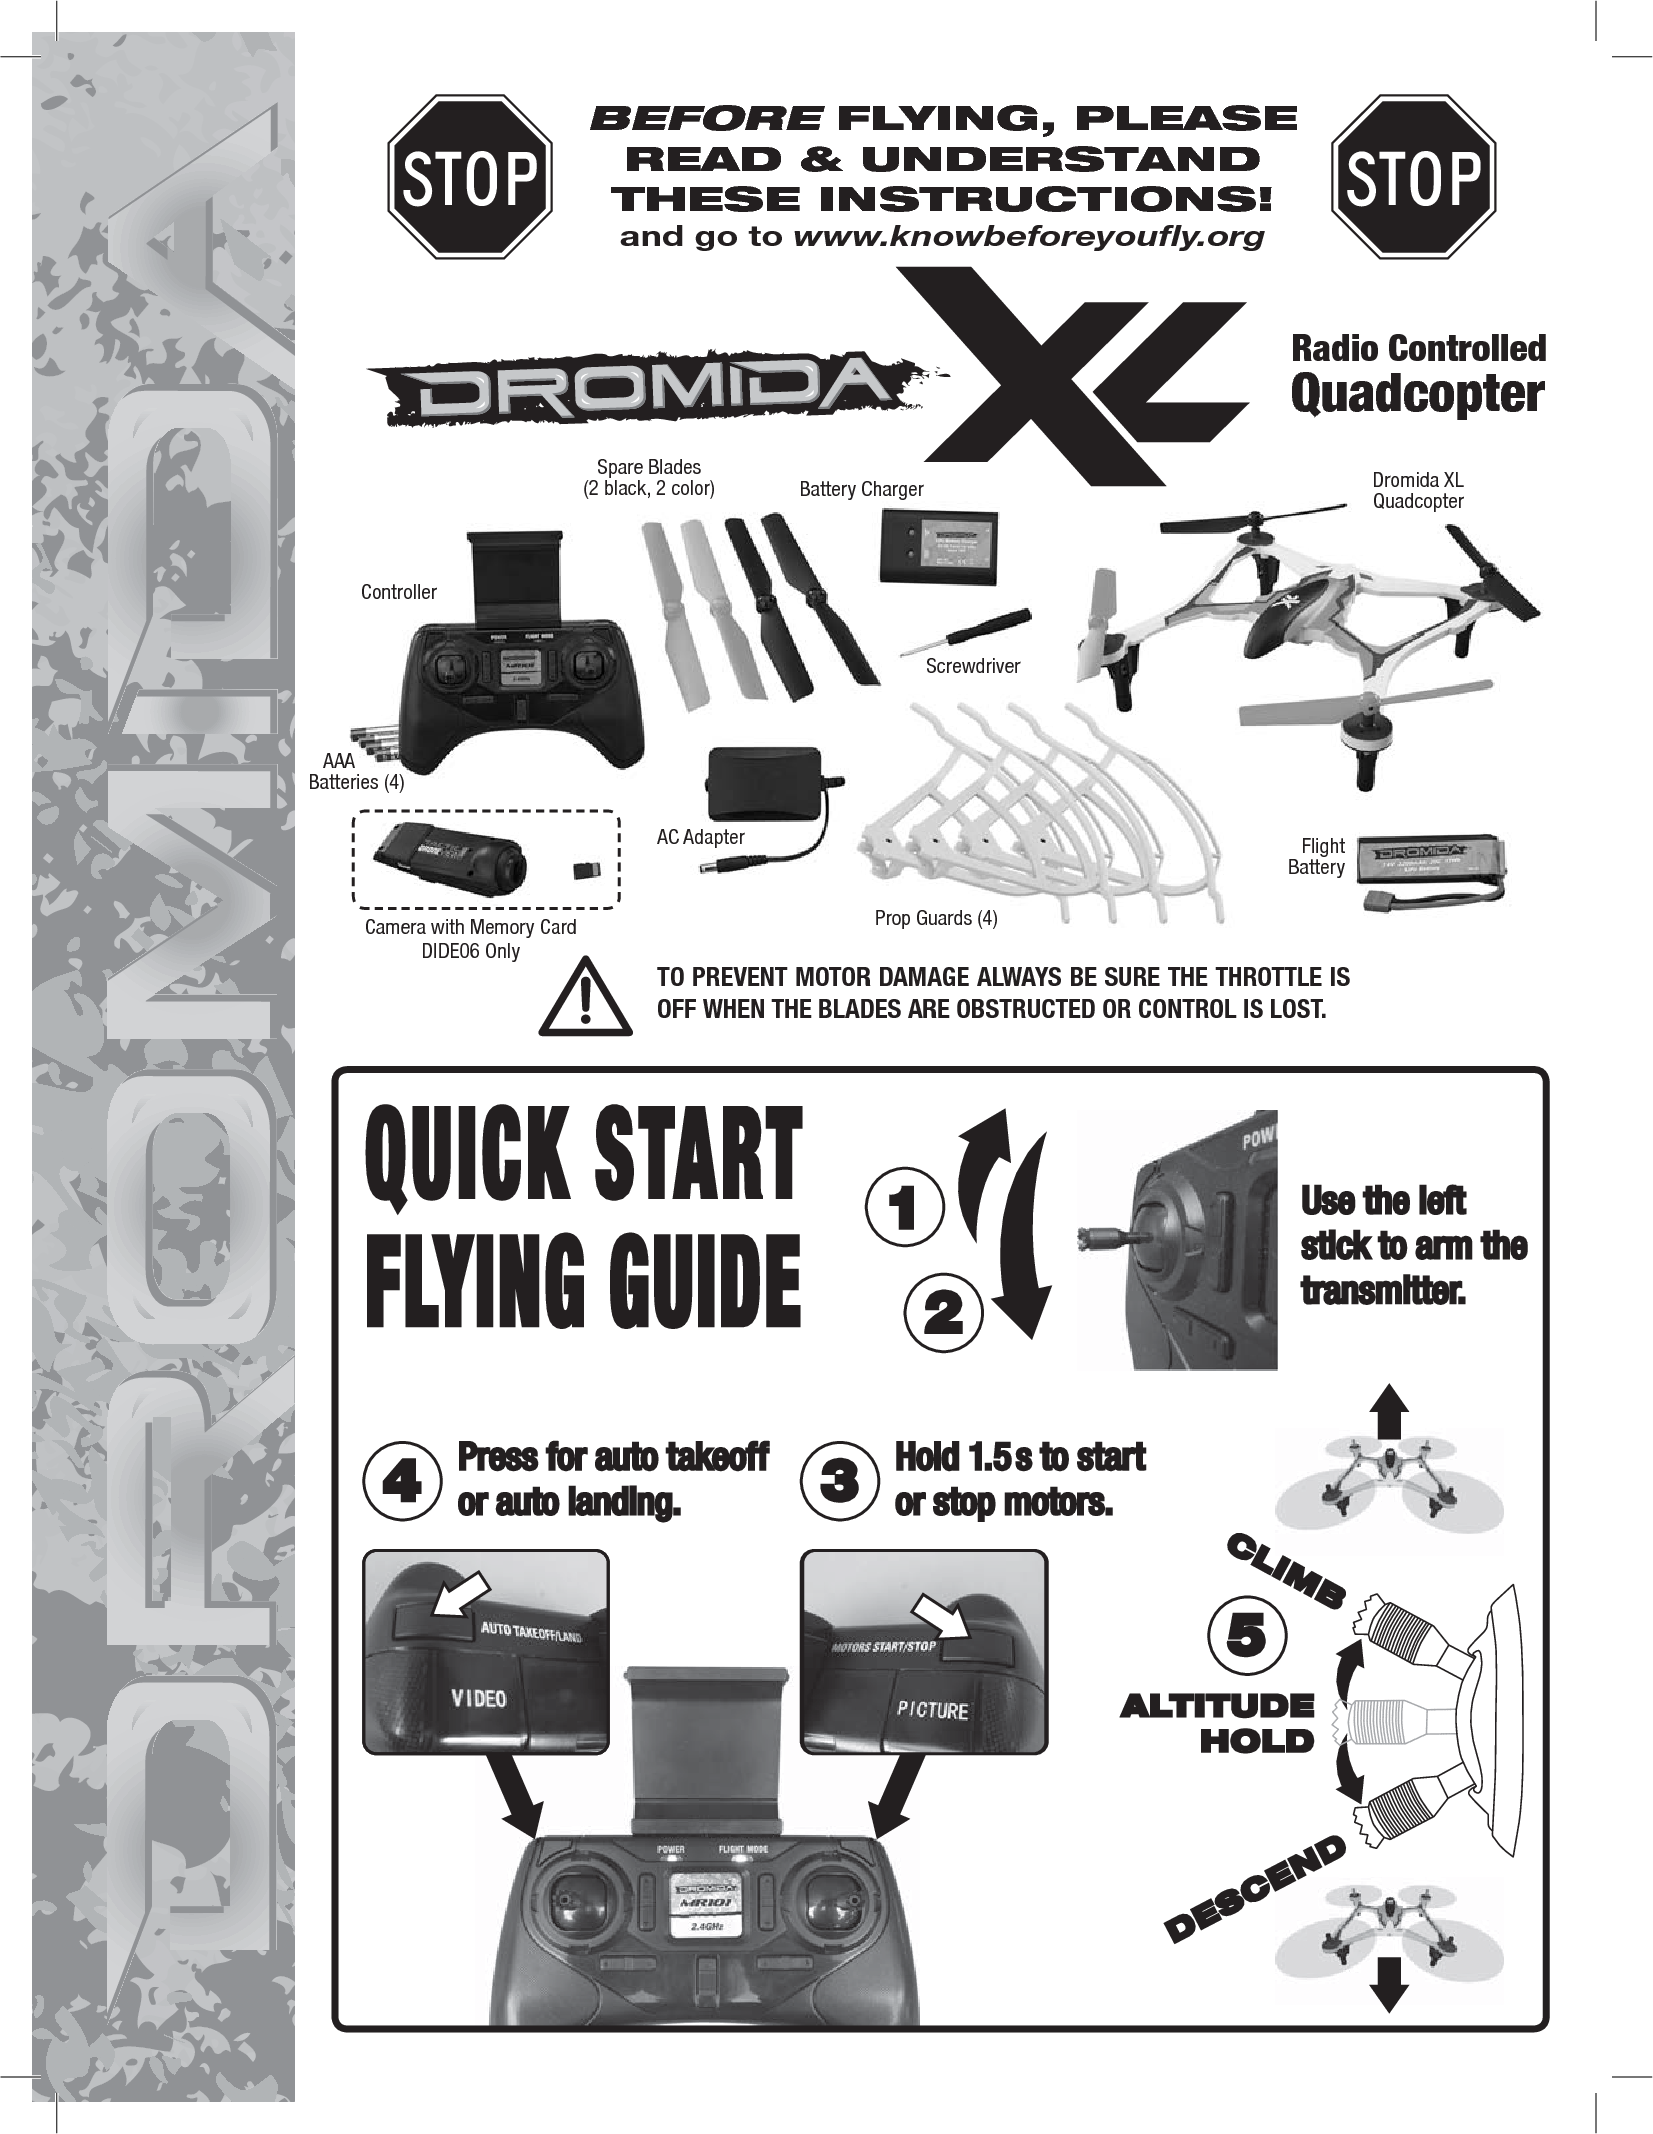 BEFORE FLYING, PLEASE READ &amp; UNDERSTANDTHESE INSTRUCTIONS!and go to www.knowbeforeyoufly.orgRadio ControlledQuadcopterTO PREVENT MOTOR DAMAGE ALWAYS BE SURE THE THROTTLE IS OFF WHEN THE BLADES ARE OBSTRUCTED OR CONTROL IS LOST.Use the left stick to arm the transmitter.12Hold 1.5 s to start or stop motors.Press for auto takeoff or auto landing.4 35ALTITUDEHOLDCLIMBDESCENDDromida XL QuadcopterFlightBattery Spare Blades(2 black, 2 color)   AAABatteries (4)ControllerScrewdriverCamera with Memory CardDIDE06 OnlyBattery ChargerAC AdapterProp Guards (4)